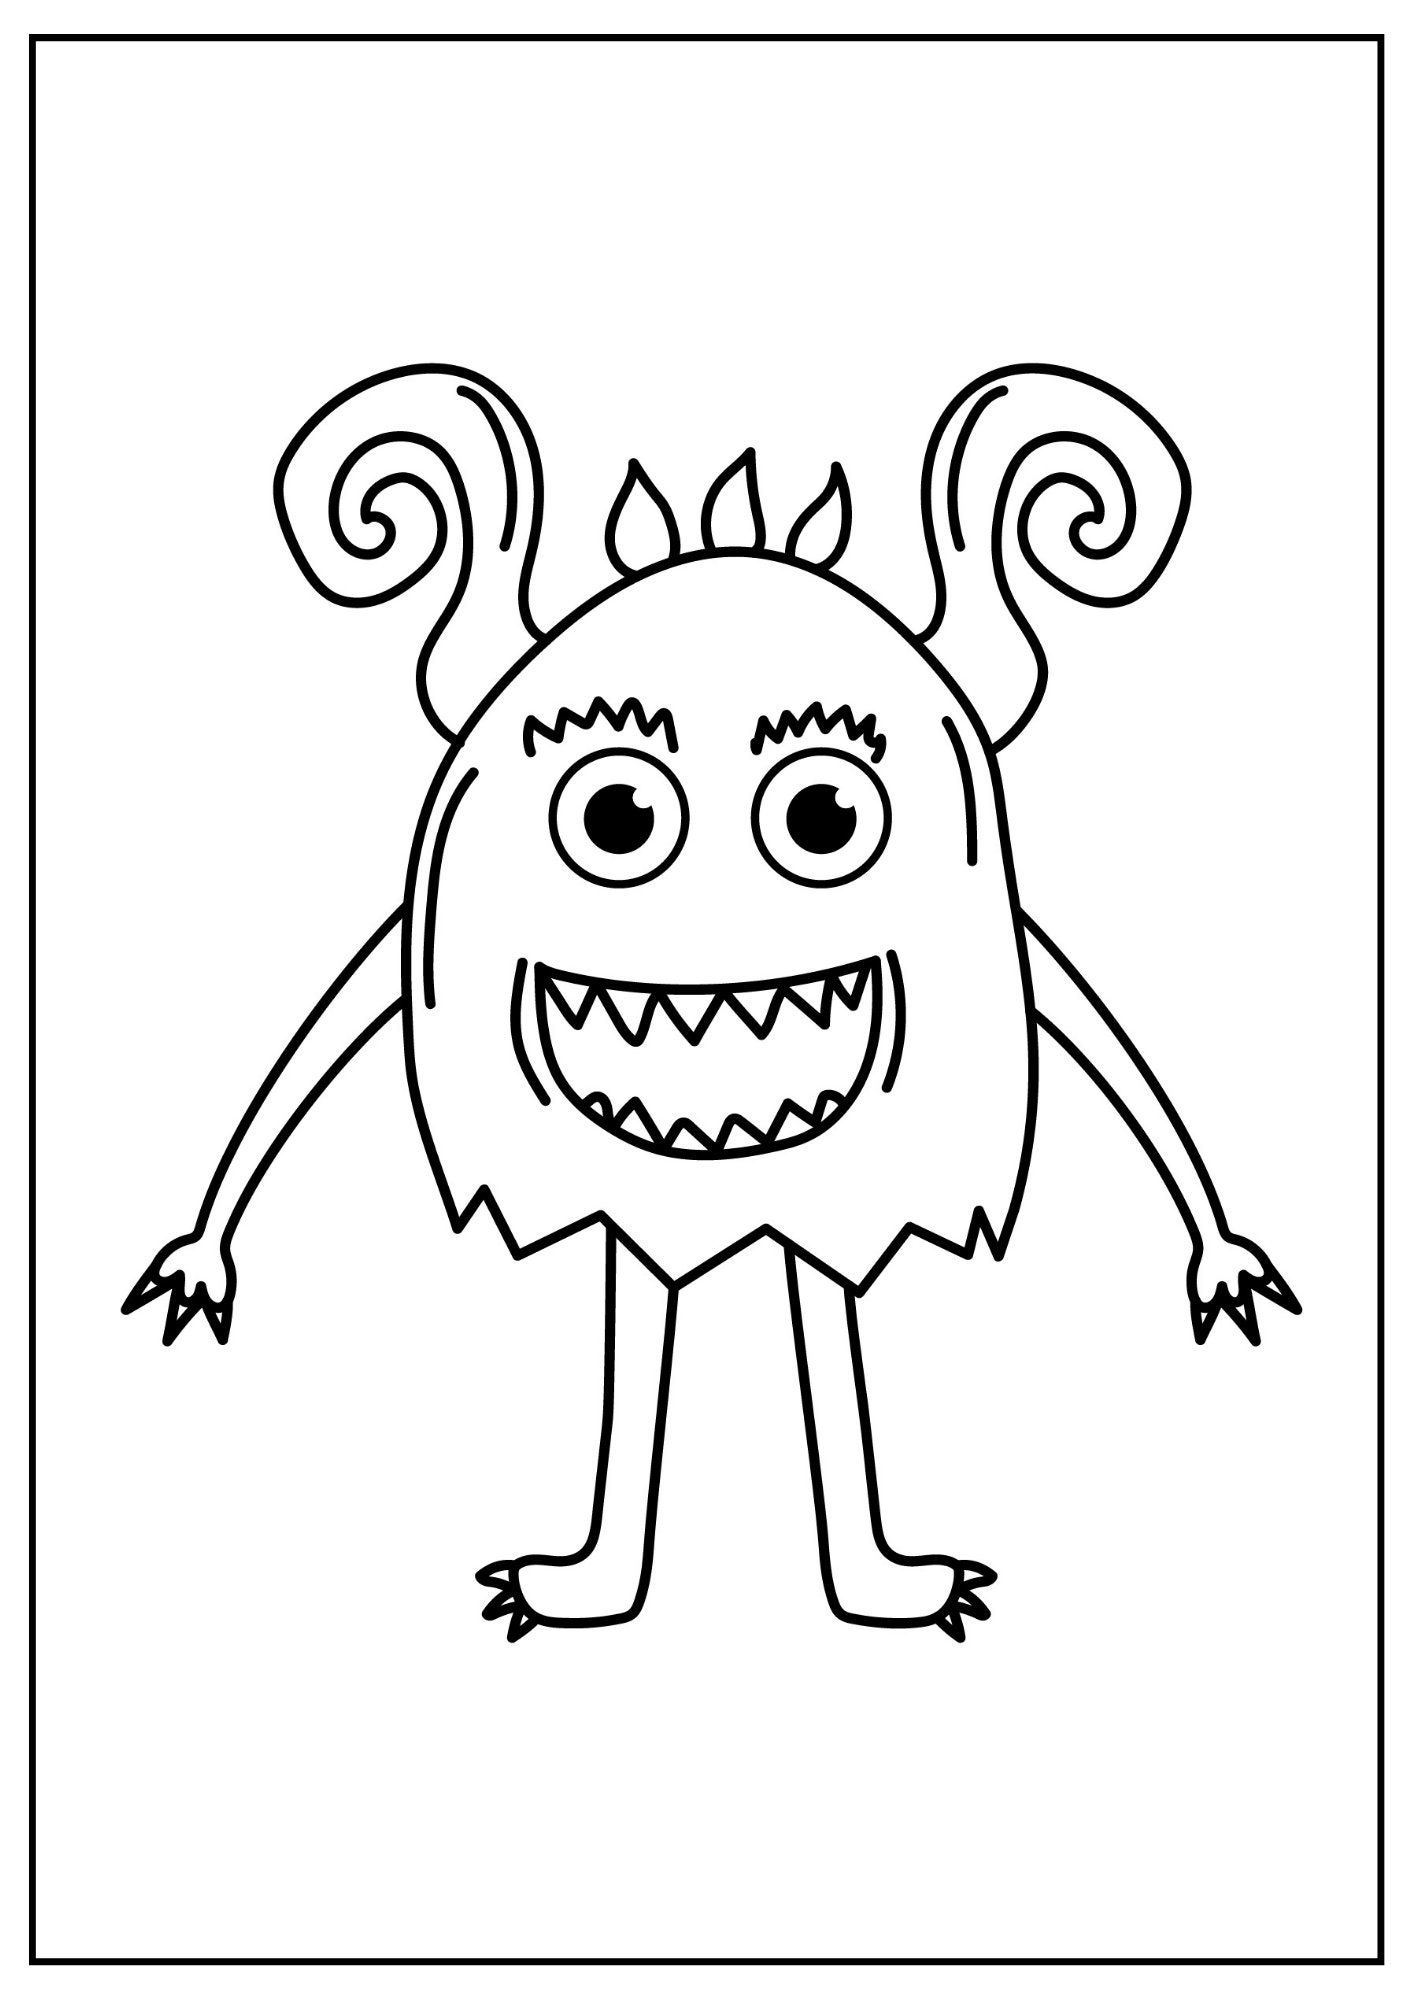 Monsters Coloring 15 Pages. - Etsy